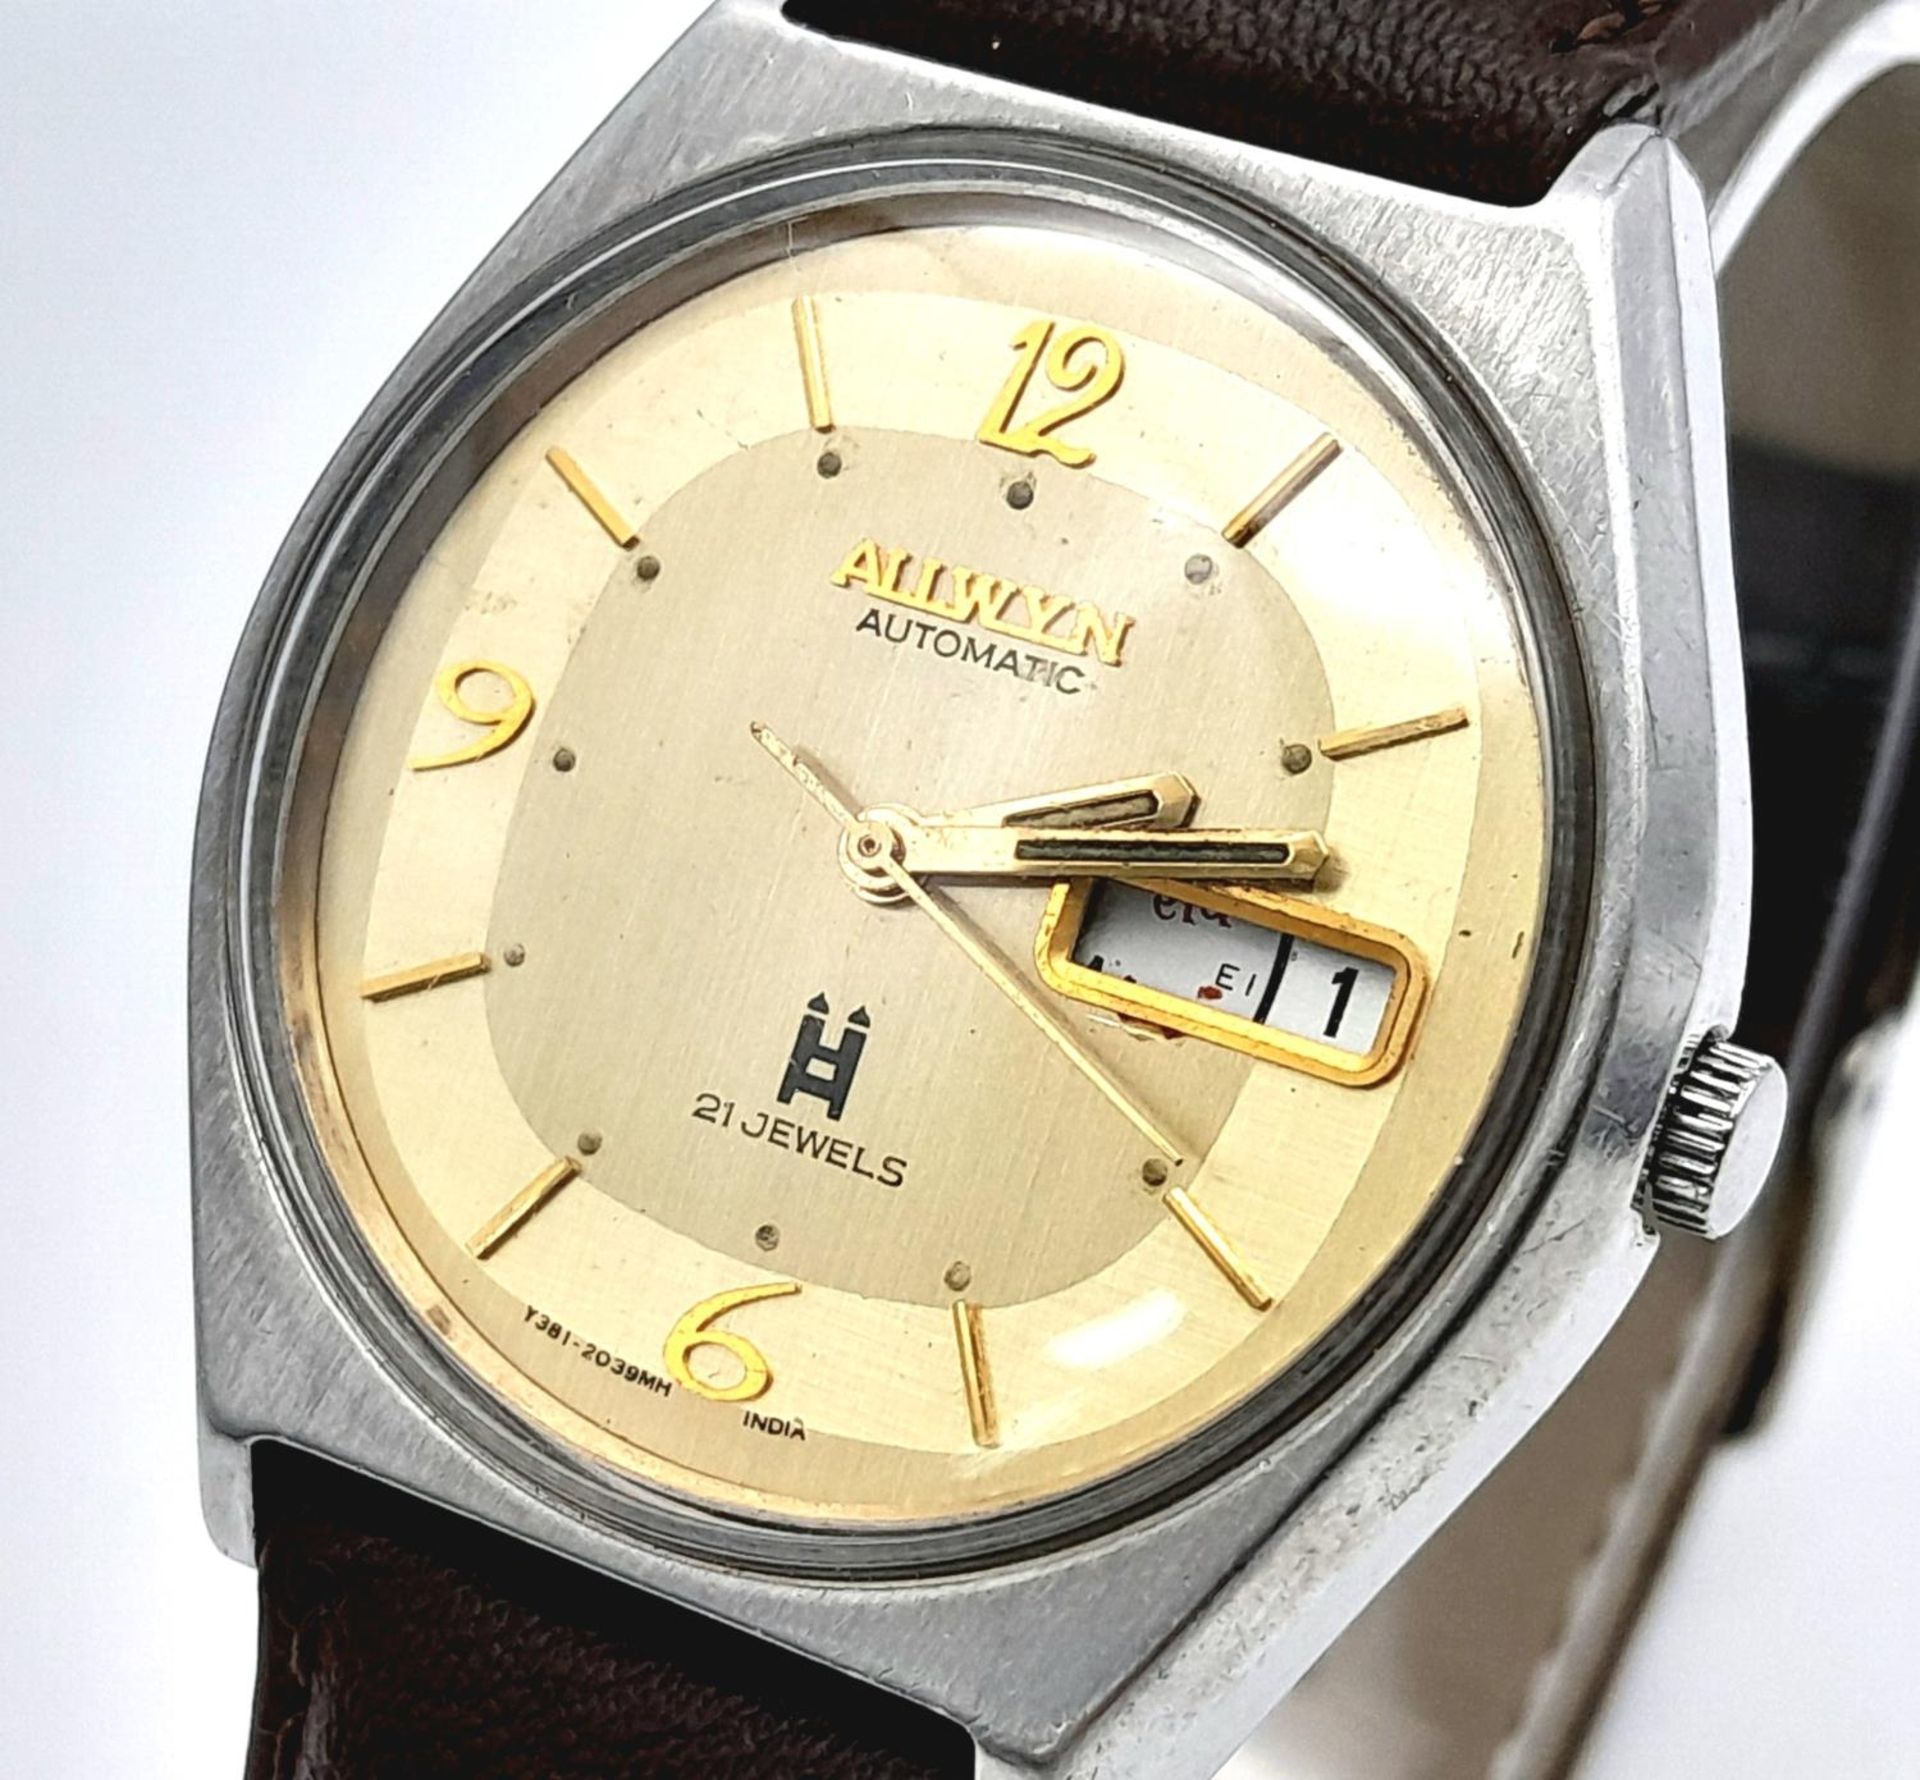 A Vintage Allwyn Automatic Gents Watch. Brown leather strap. Stainless steel case - 36mm. Yellow - Image 2 of 6